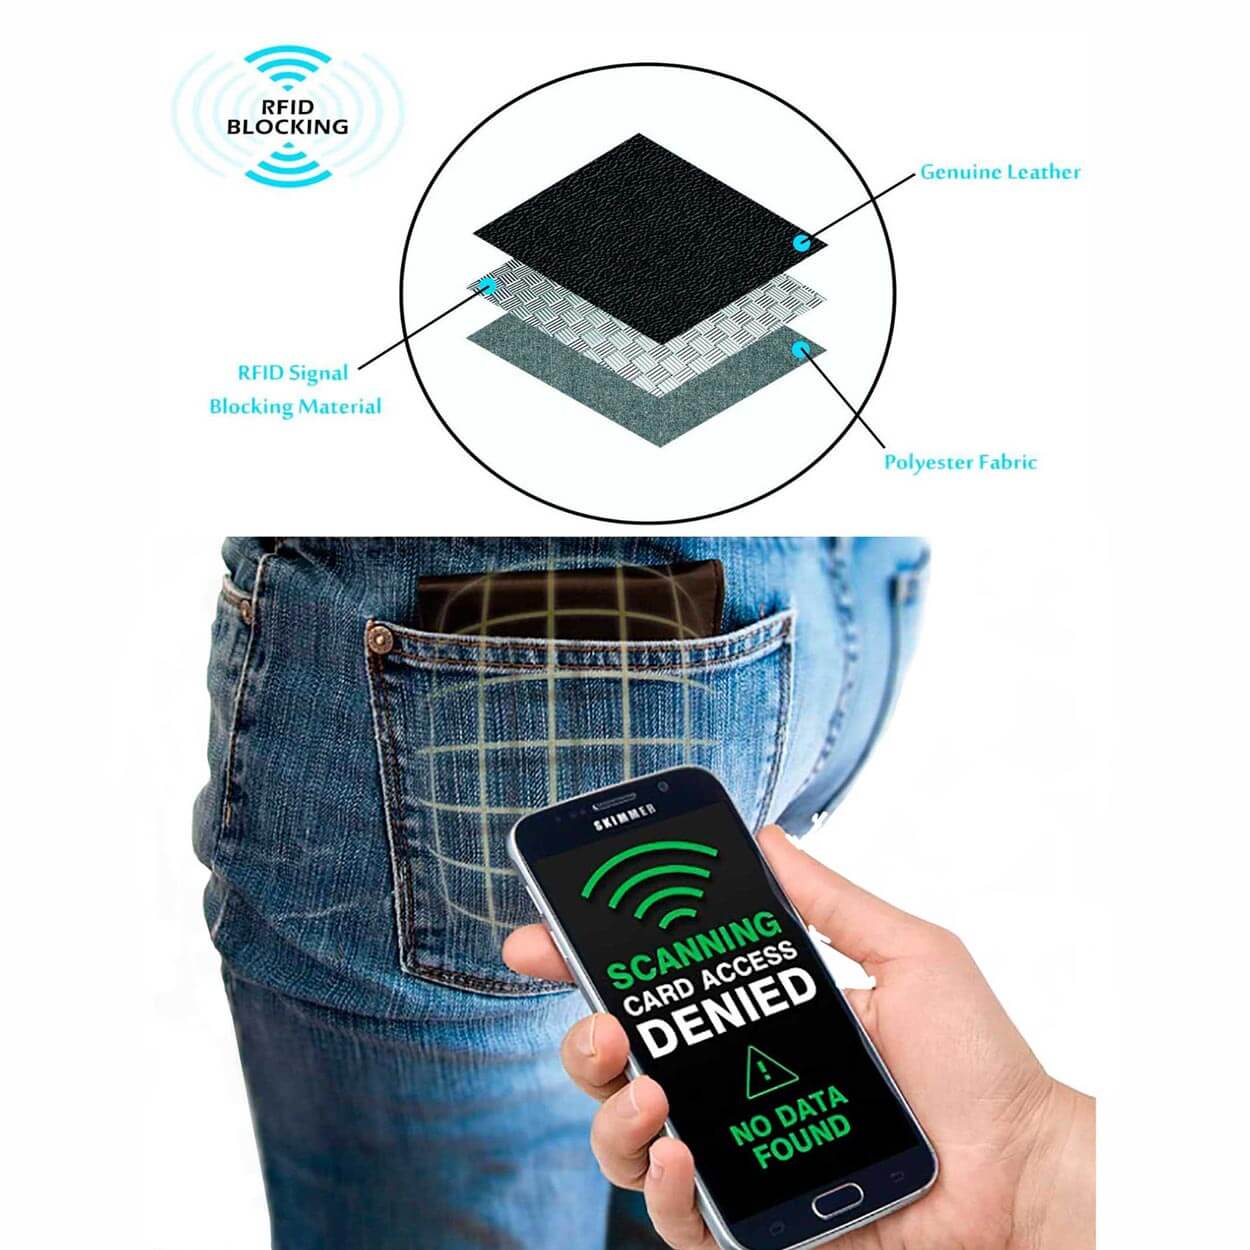 Strong RFID Blocking Technology to protect your privacy - Standard with all DiLoro wallets